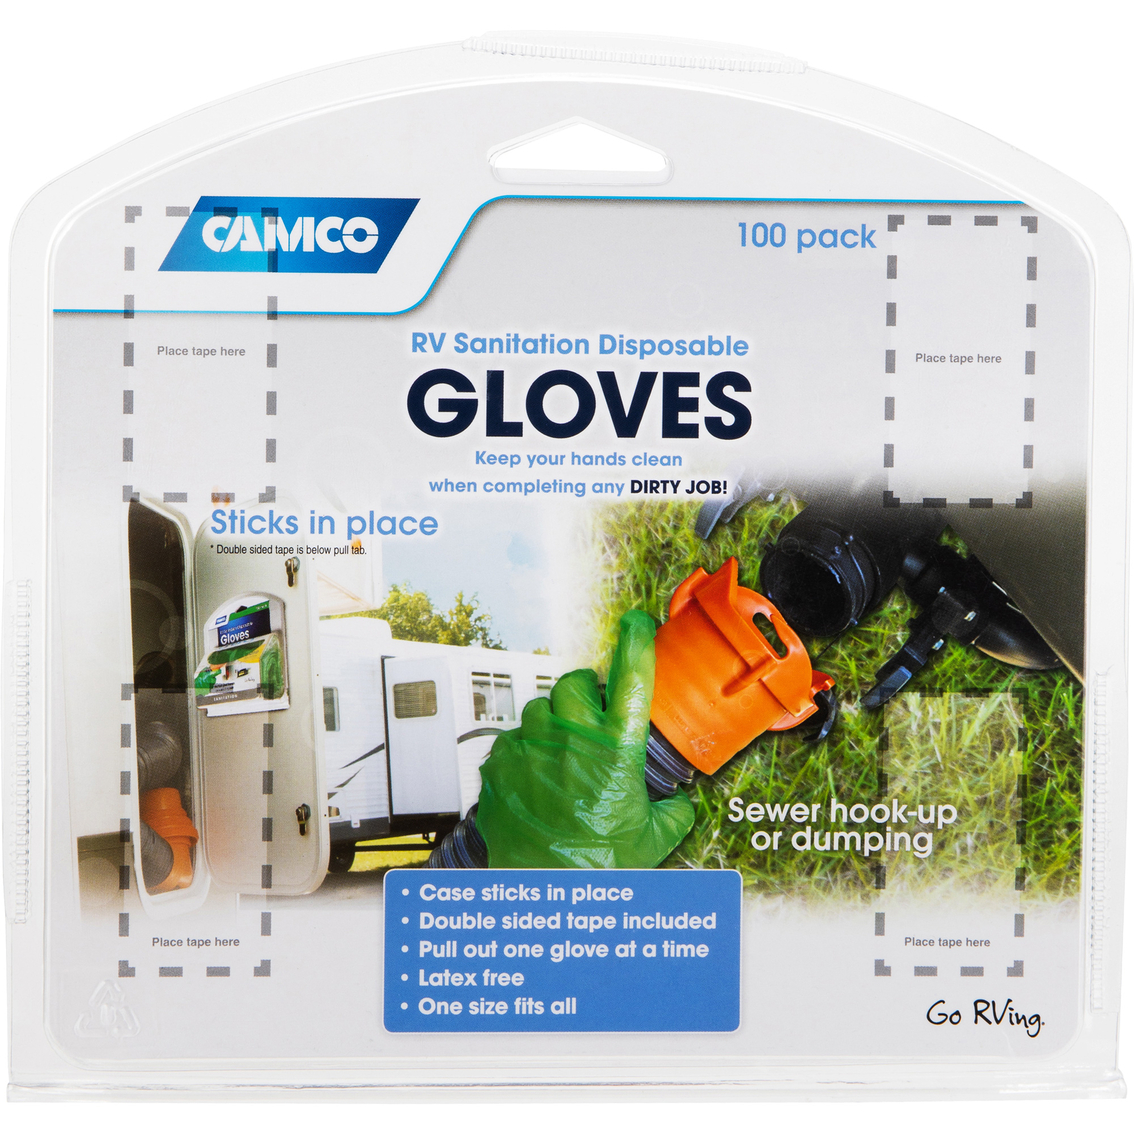 Camco RV Sanitation Disposable Gloves, 100 ct. - Image 2 of 4